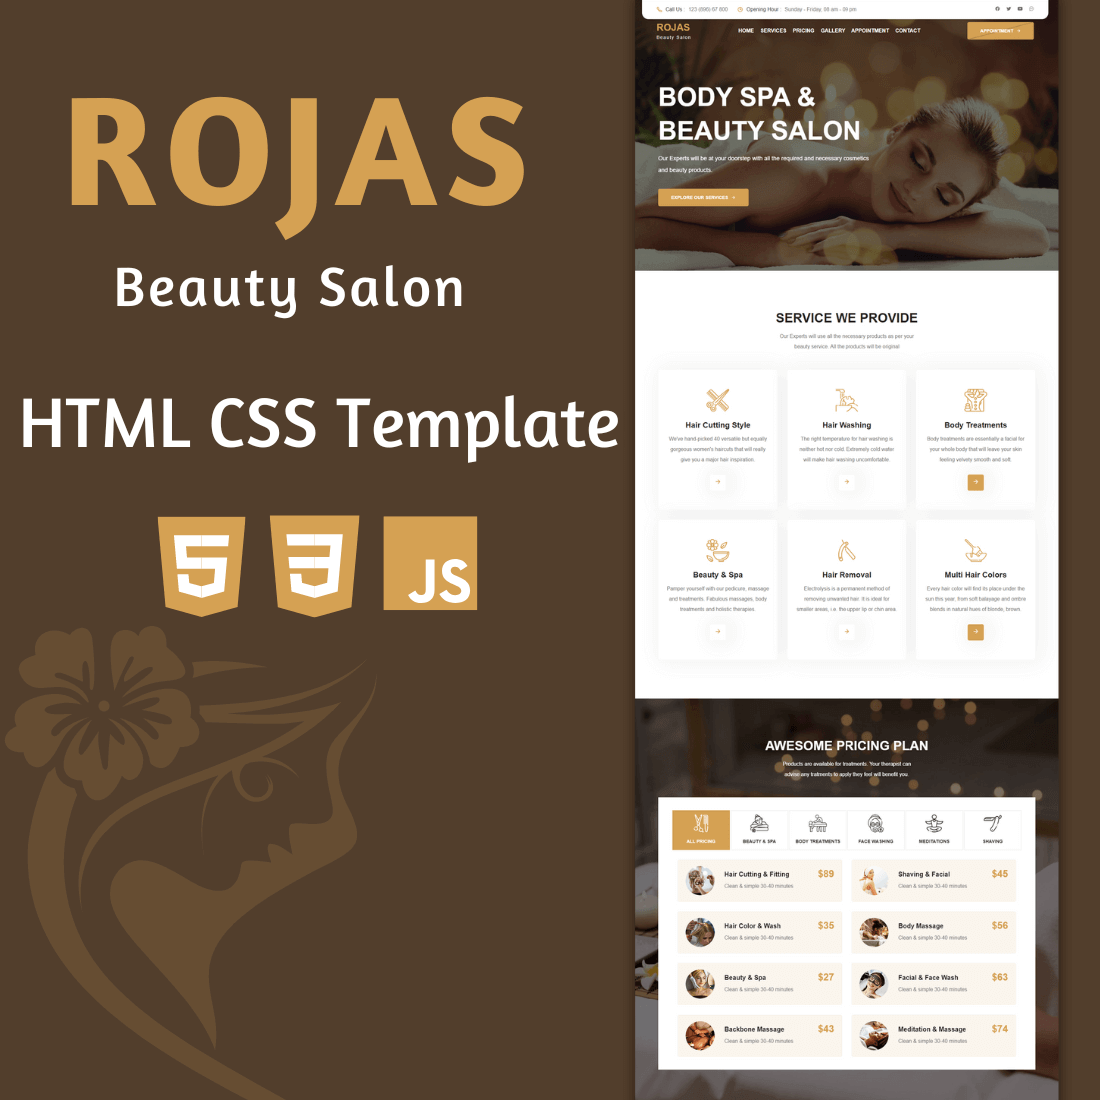 ROJAS Beauty Salon- HTML CSS Template cover image.